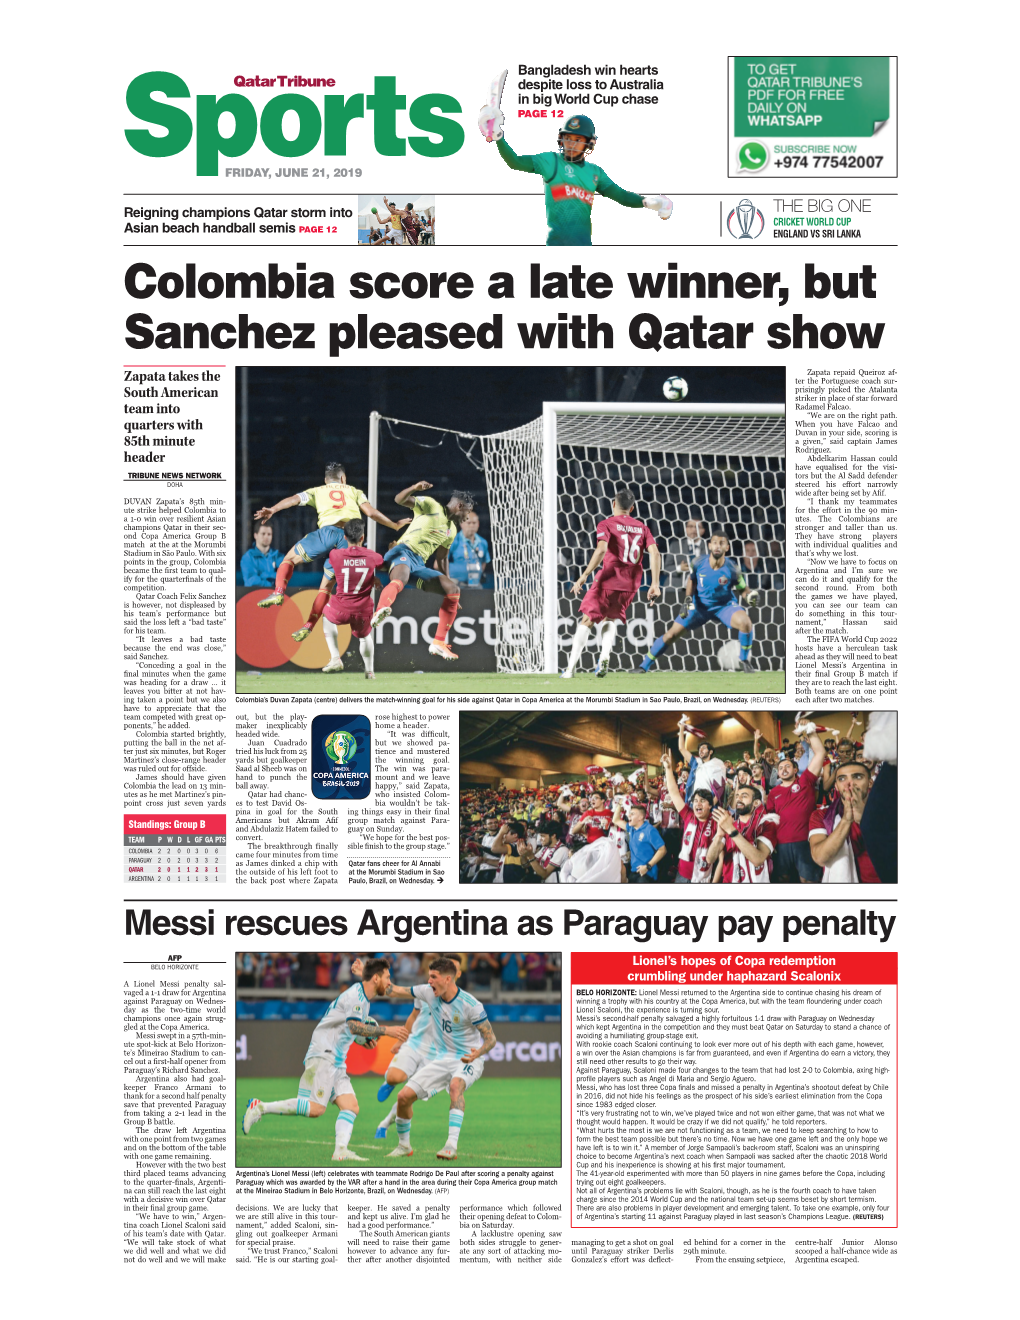 Colombia Score a Late Winner, but Sanchez Pleased with Qatar Show